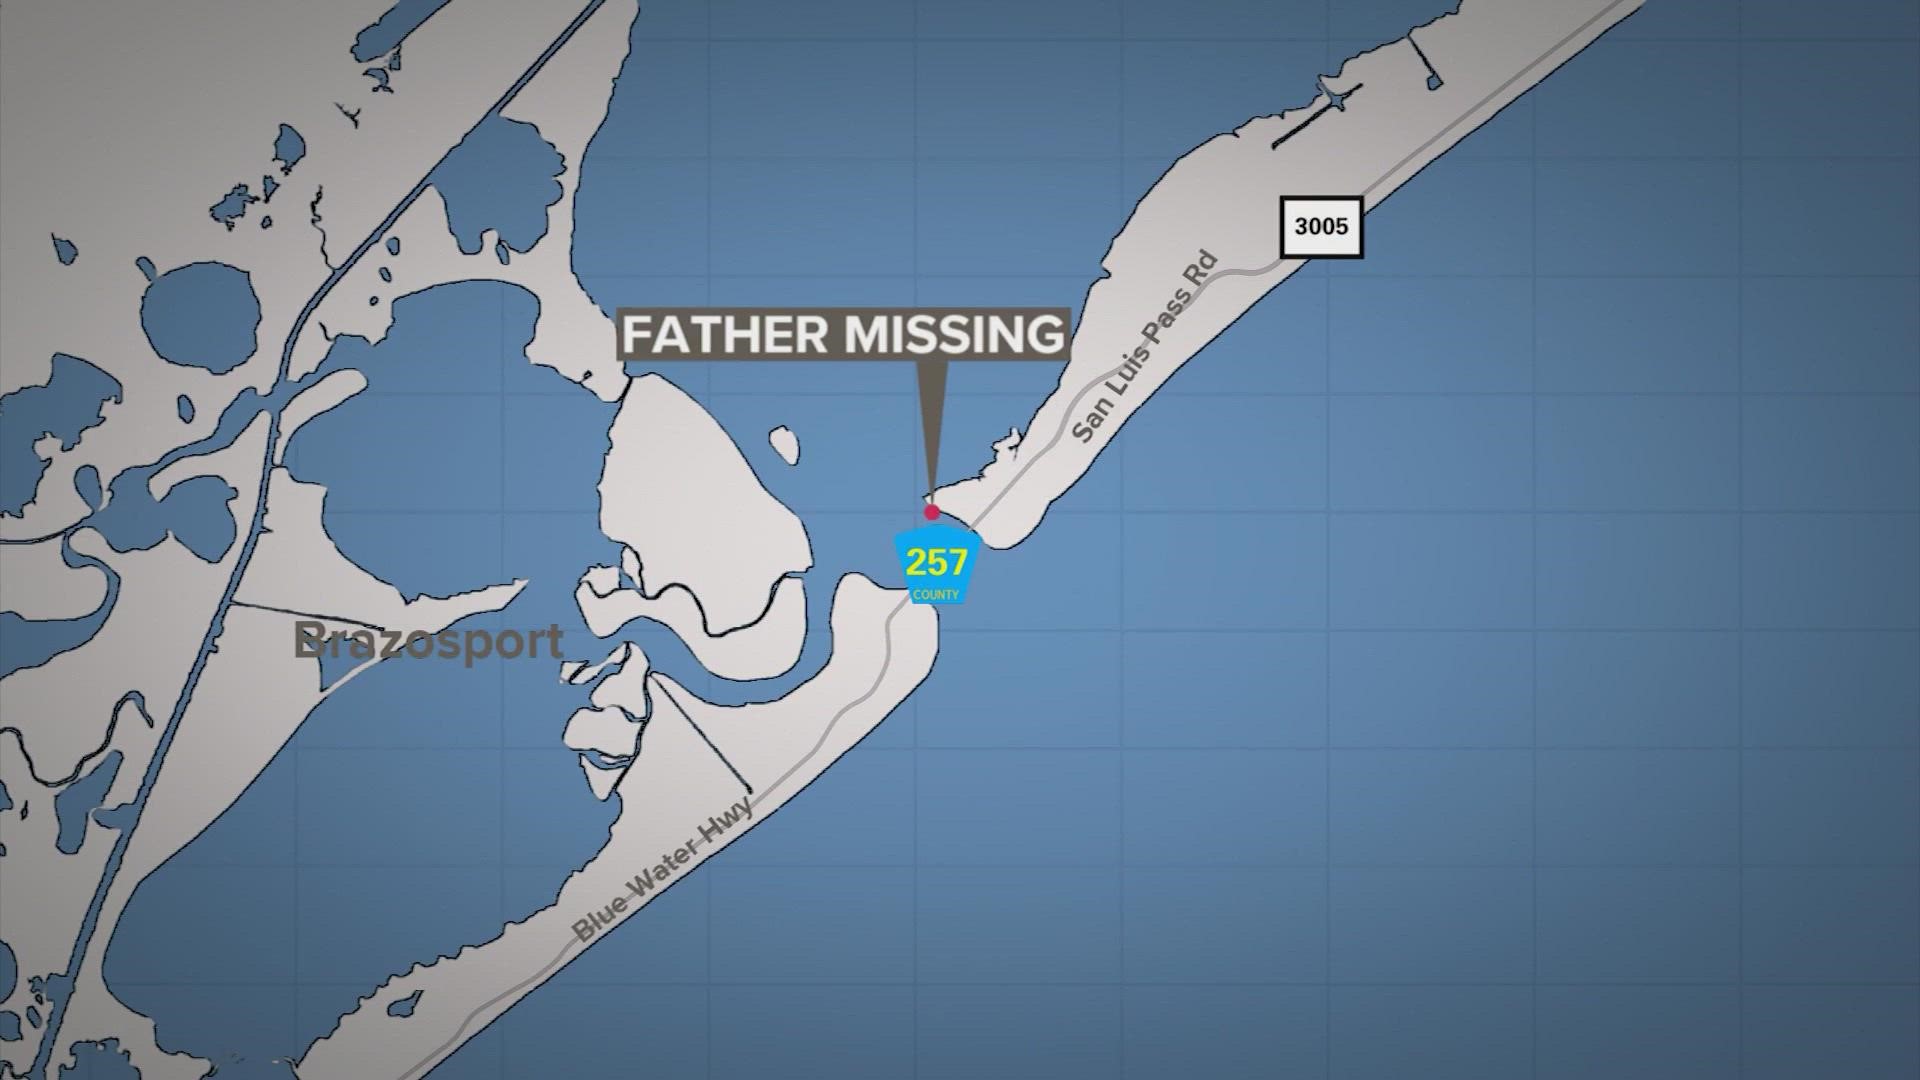 The 25-year-old man was last seen in the water around 7 p.m. Sunday when the little girl was on a float being blown to the northeast by the wind. She was rescued.